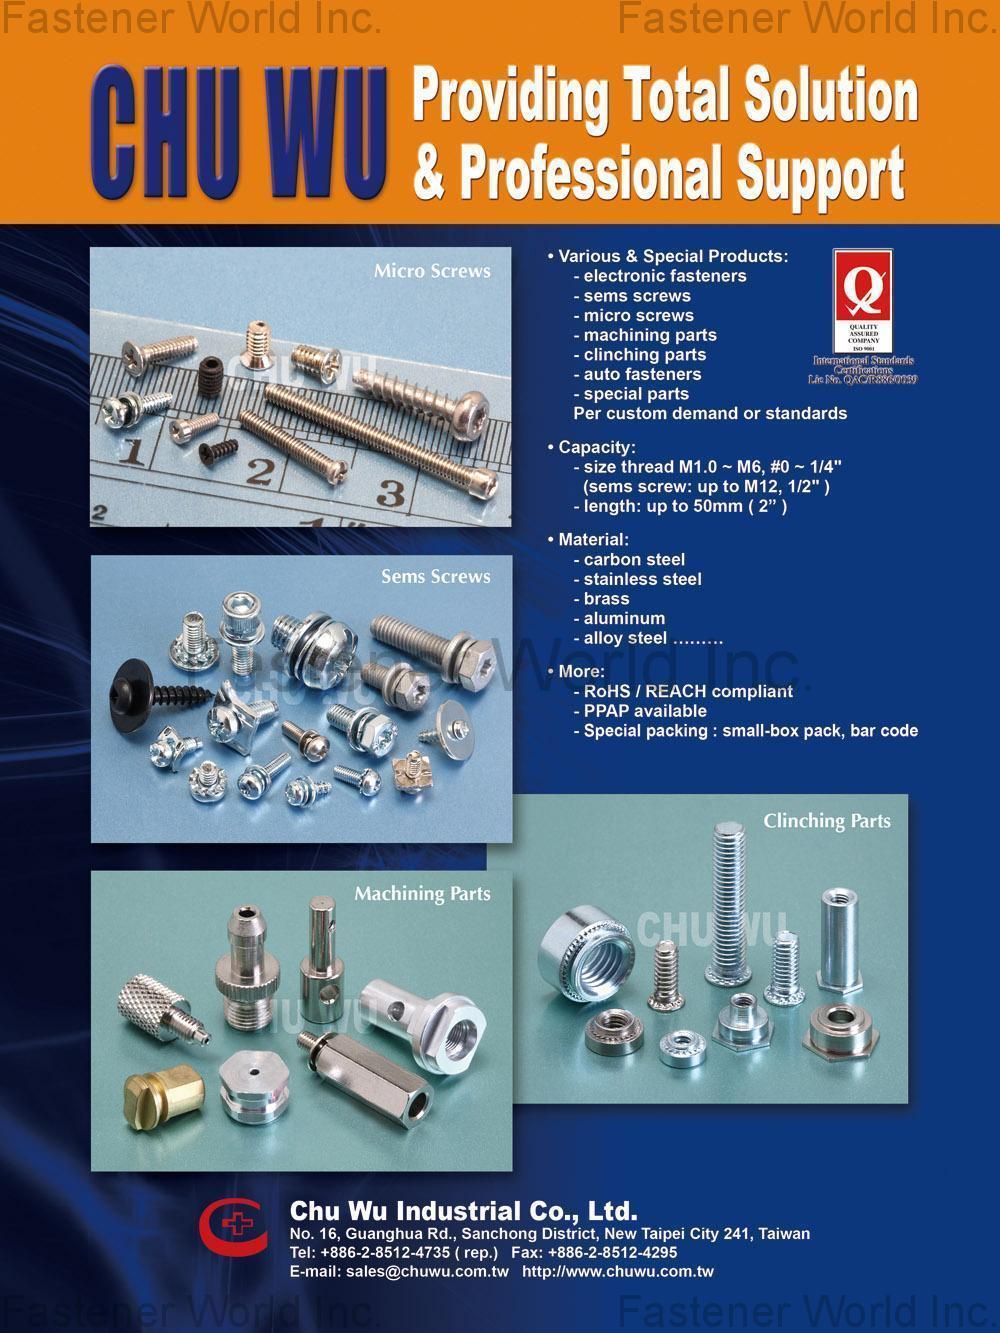 CHU WU INDUSTRIAL CO., LTD.  , Electronic Fasteners, Sems Screw, Micro Screw, Machining Part, Clinching Part, Special screw , All Kinds of Screws